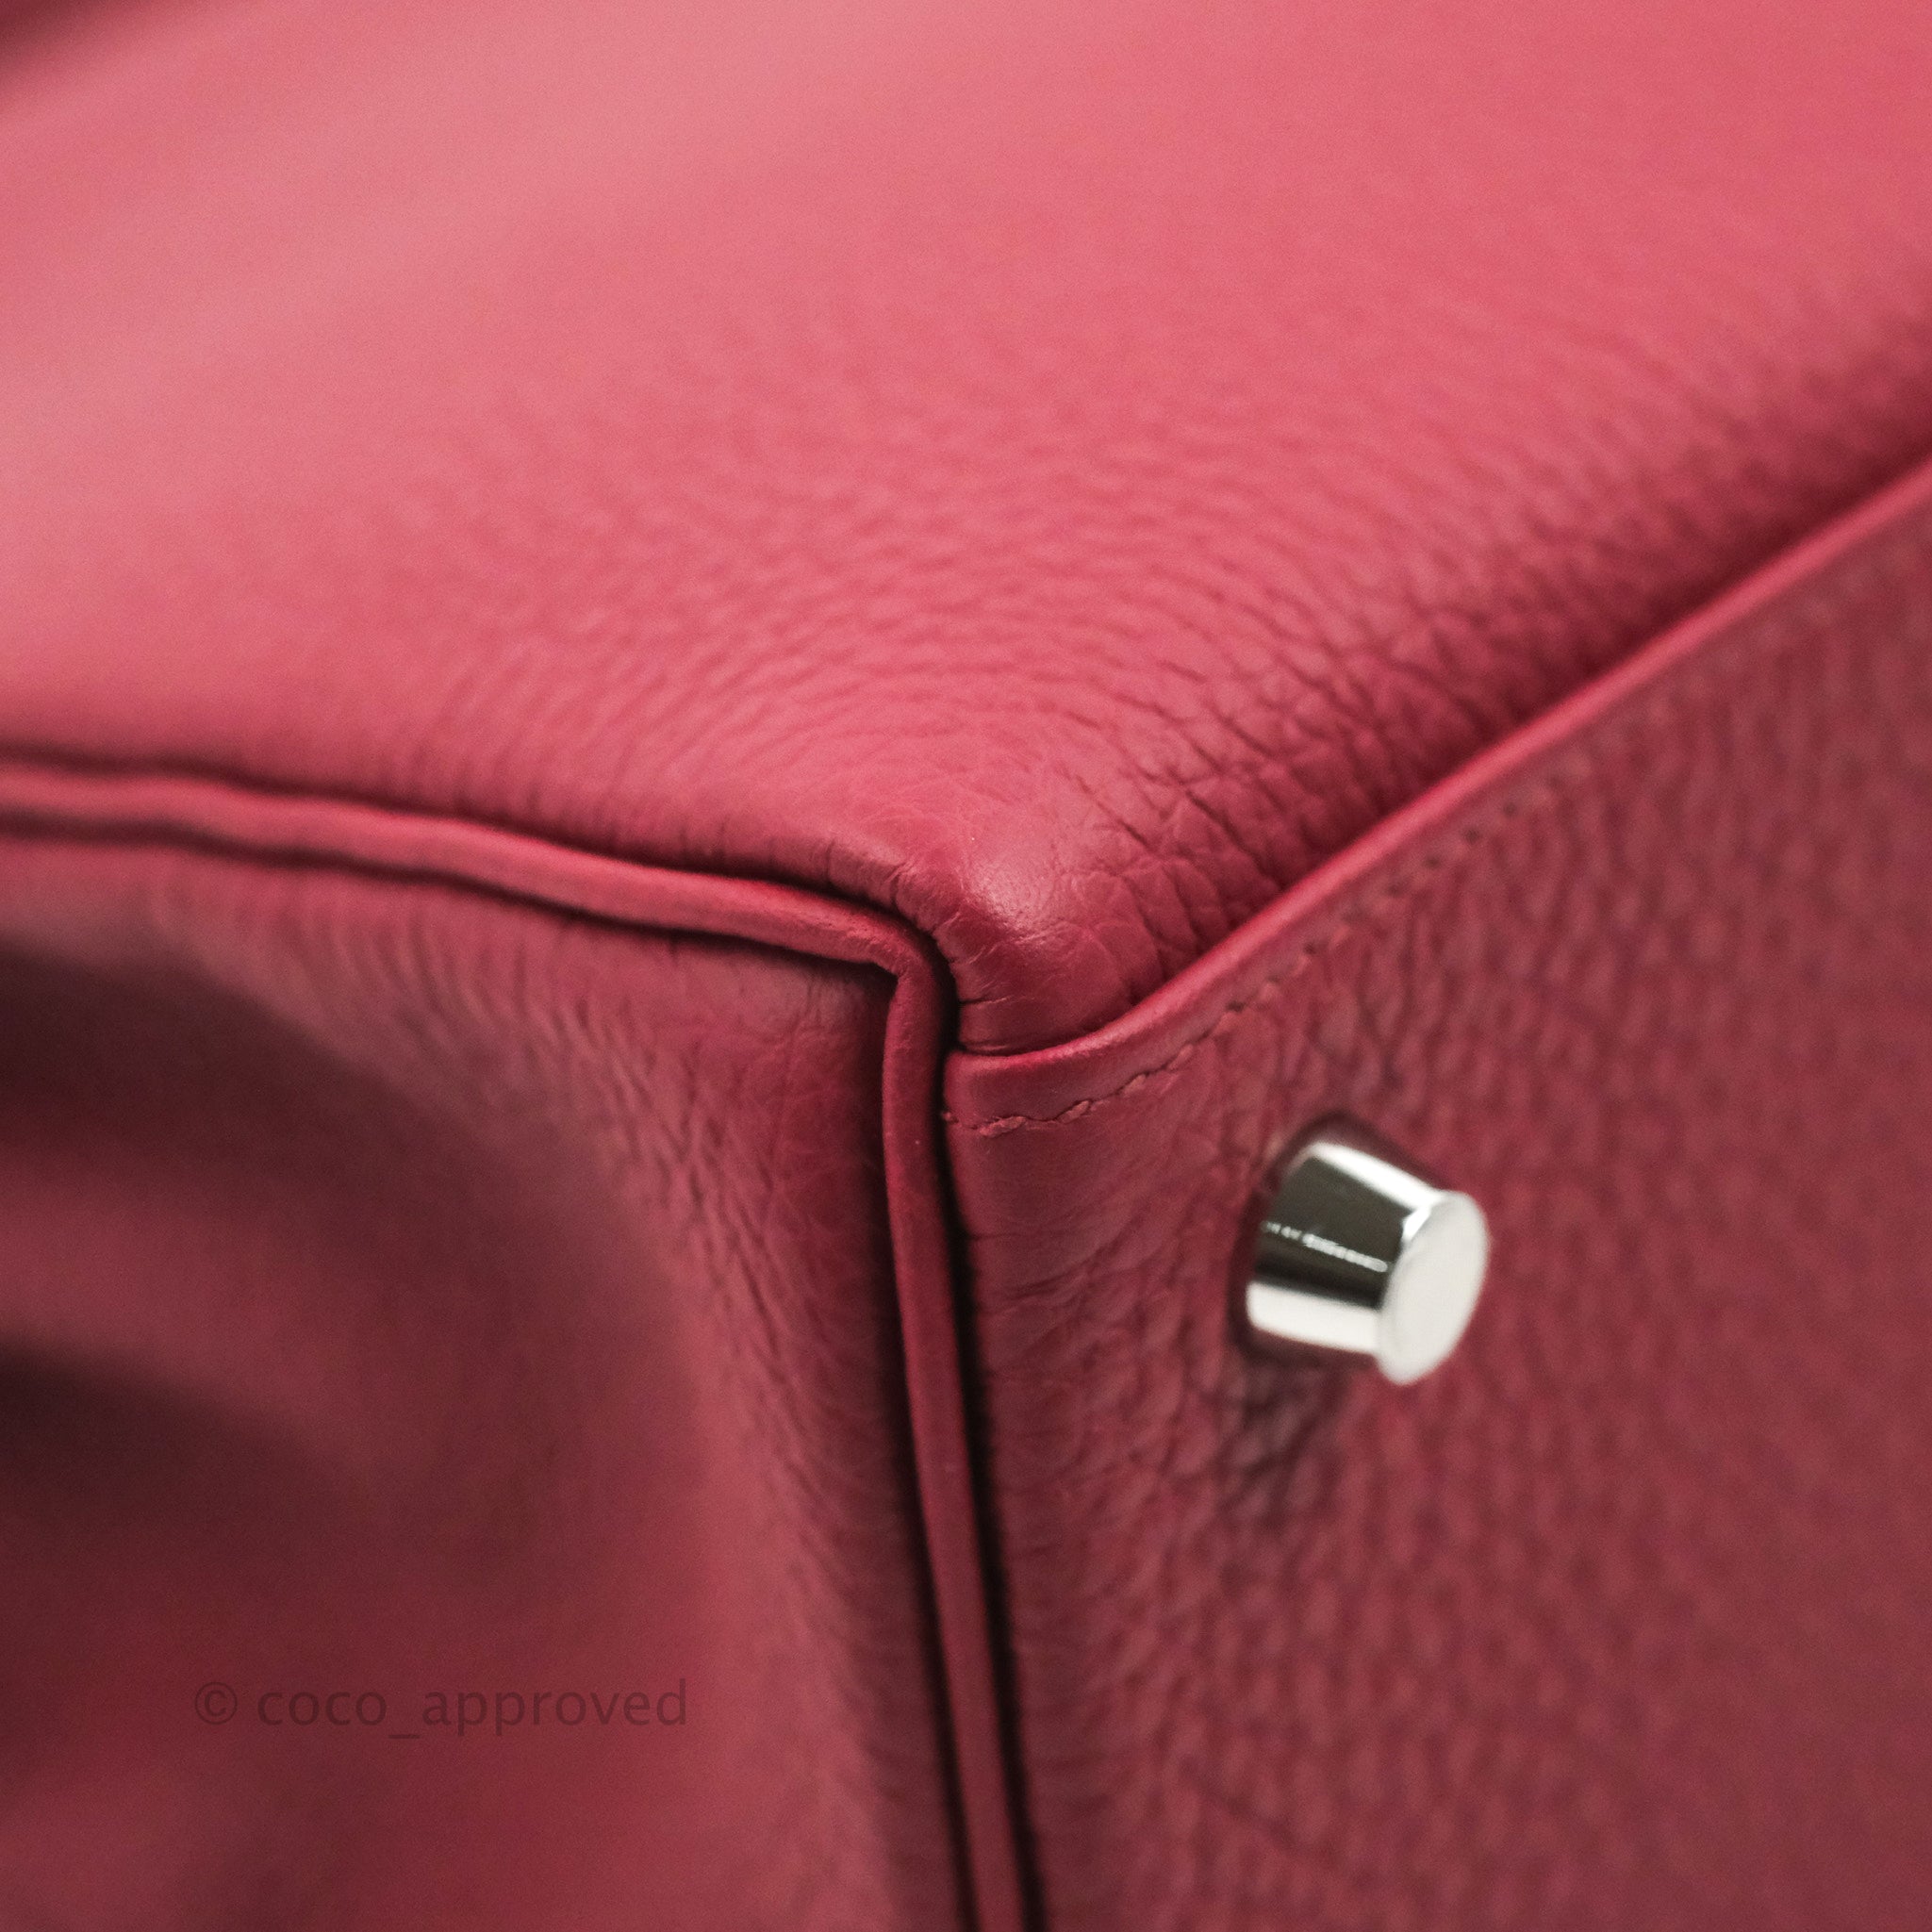 DM/email us to purchase - Hermes Kelly Retourne 25 Togo Rouge Grenat P –  Coco Approved Studio